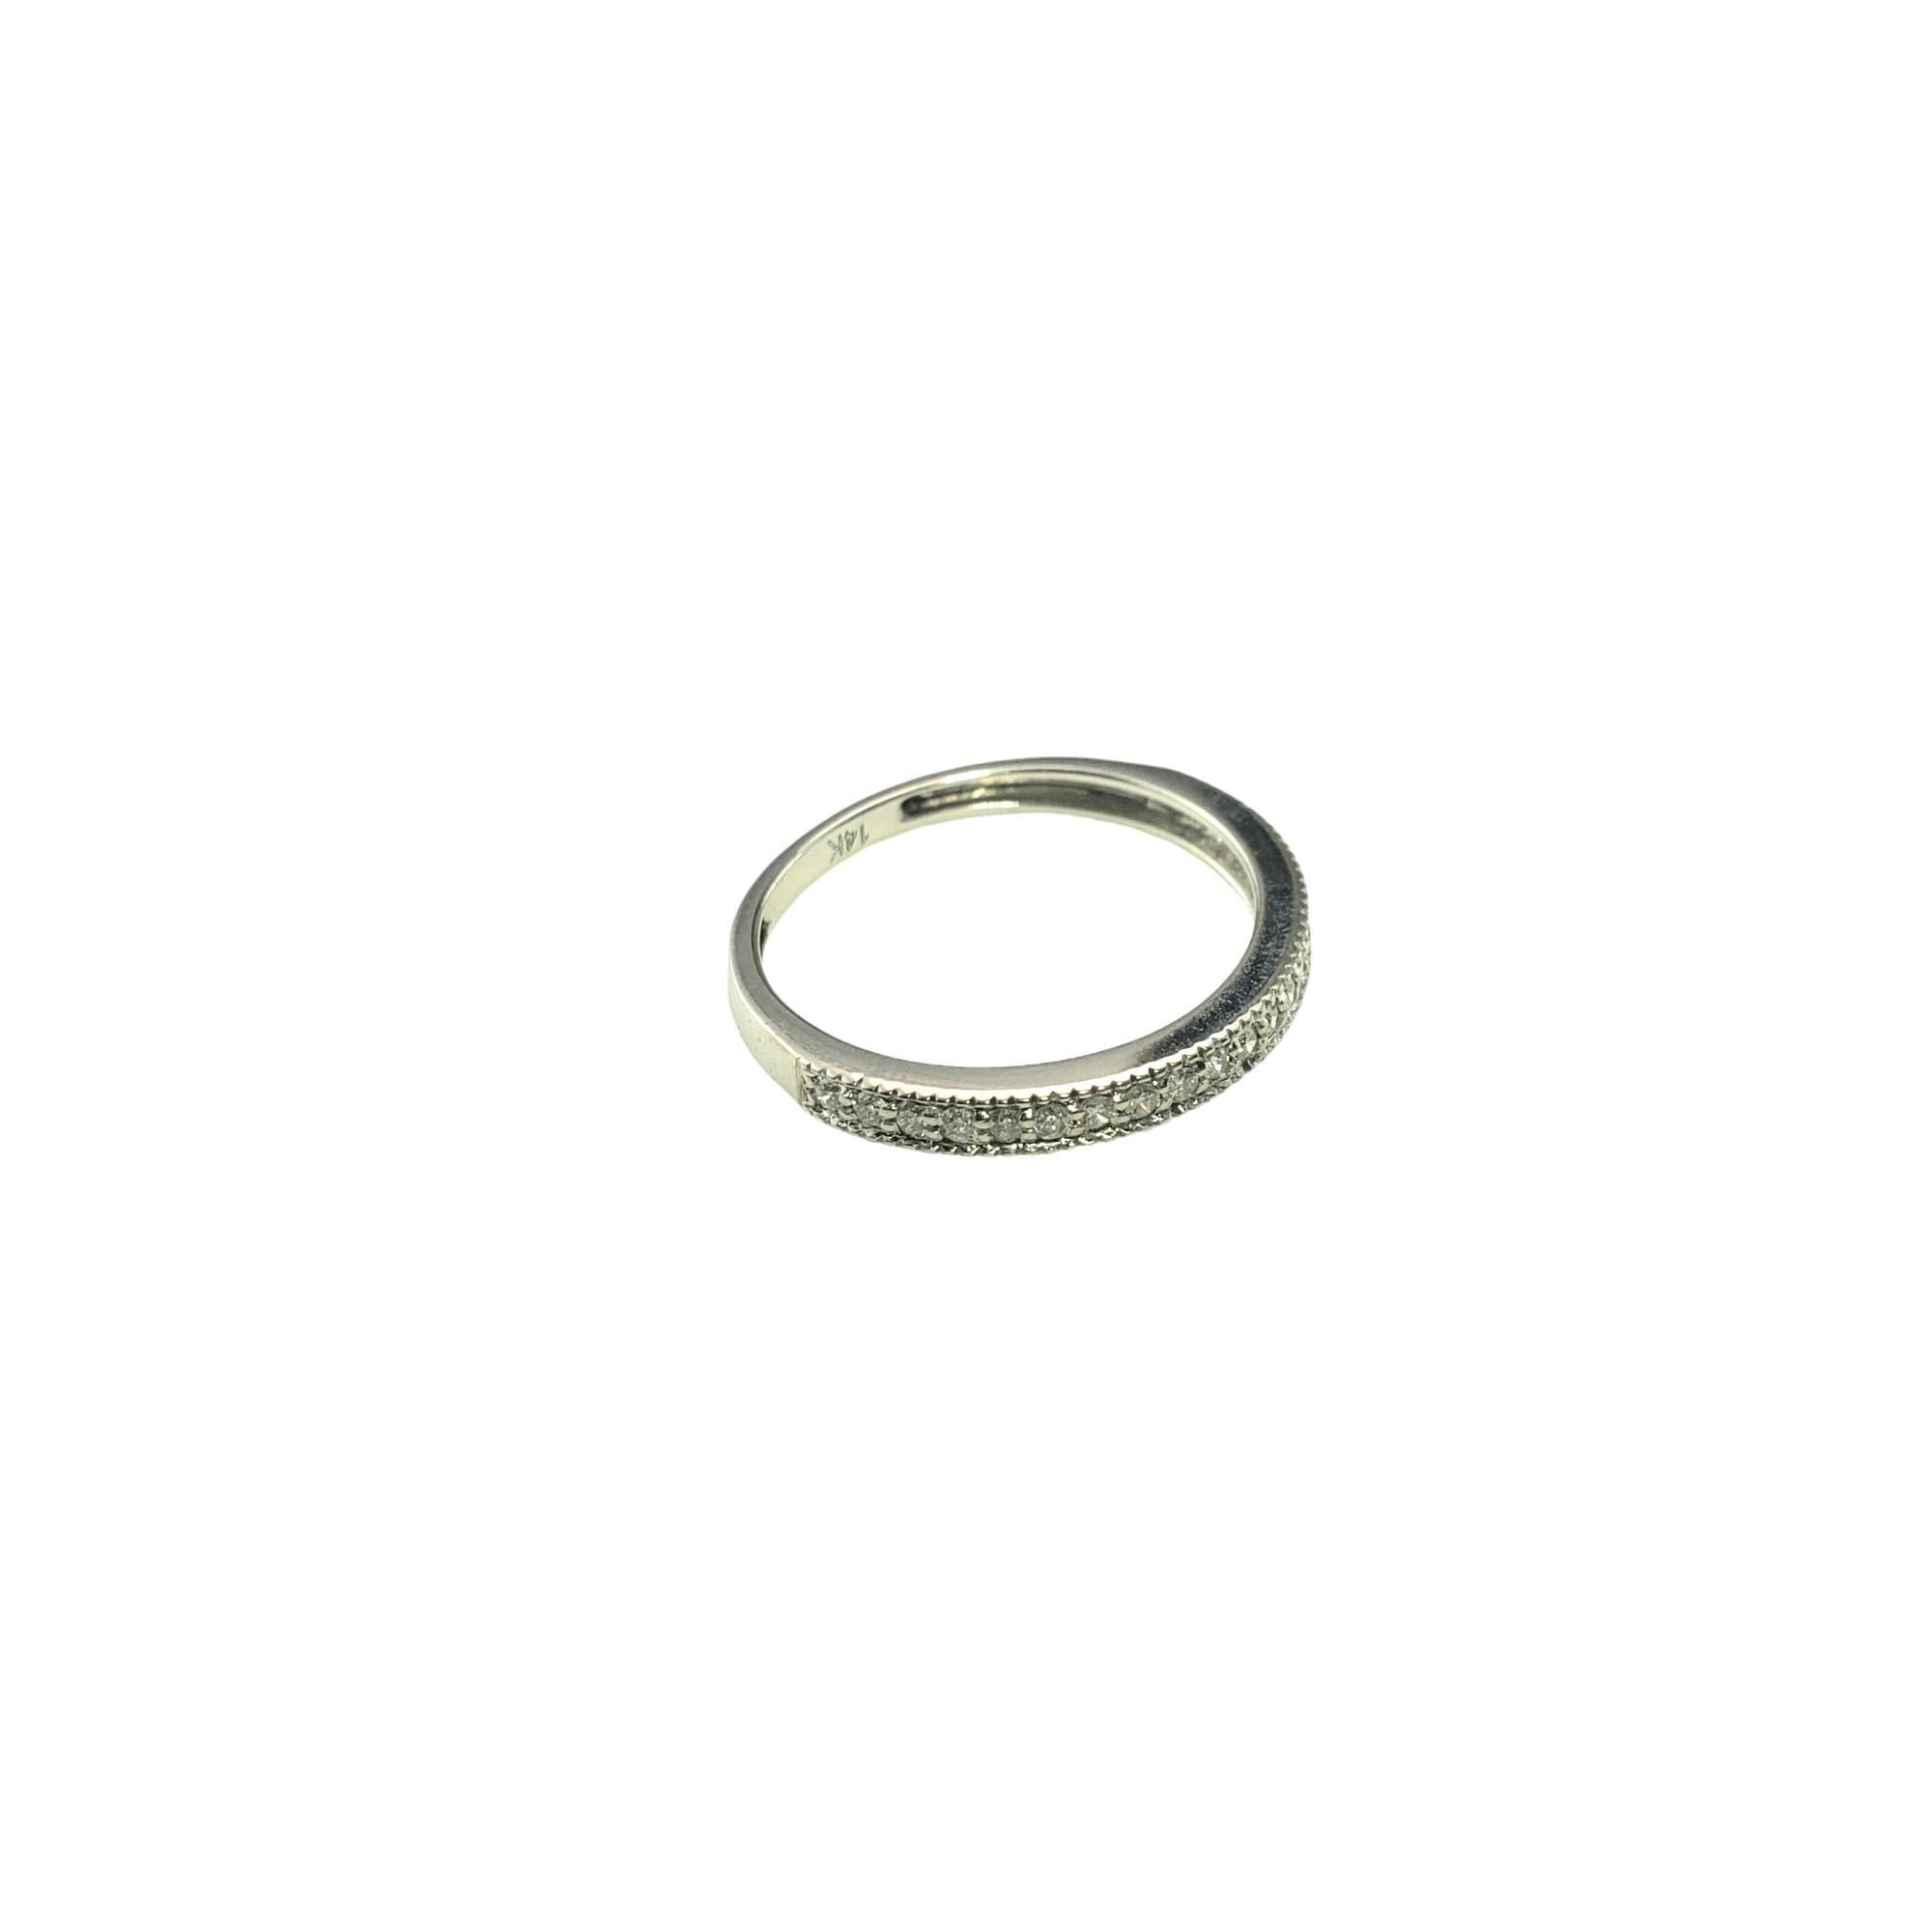 5.75 ring size